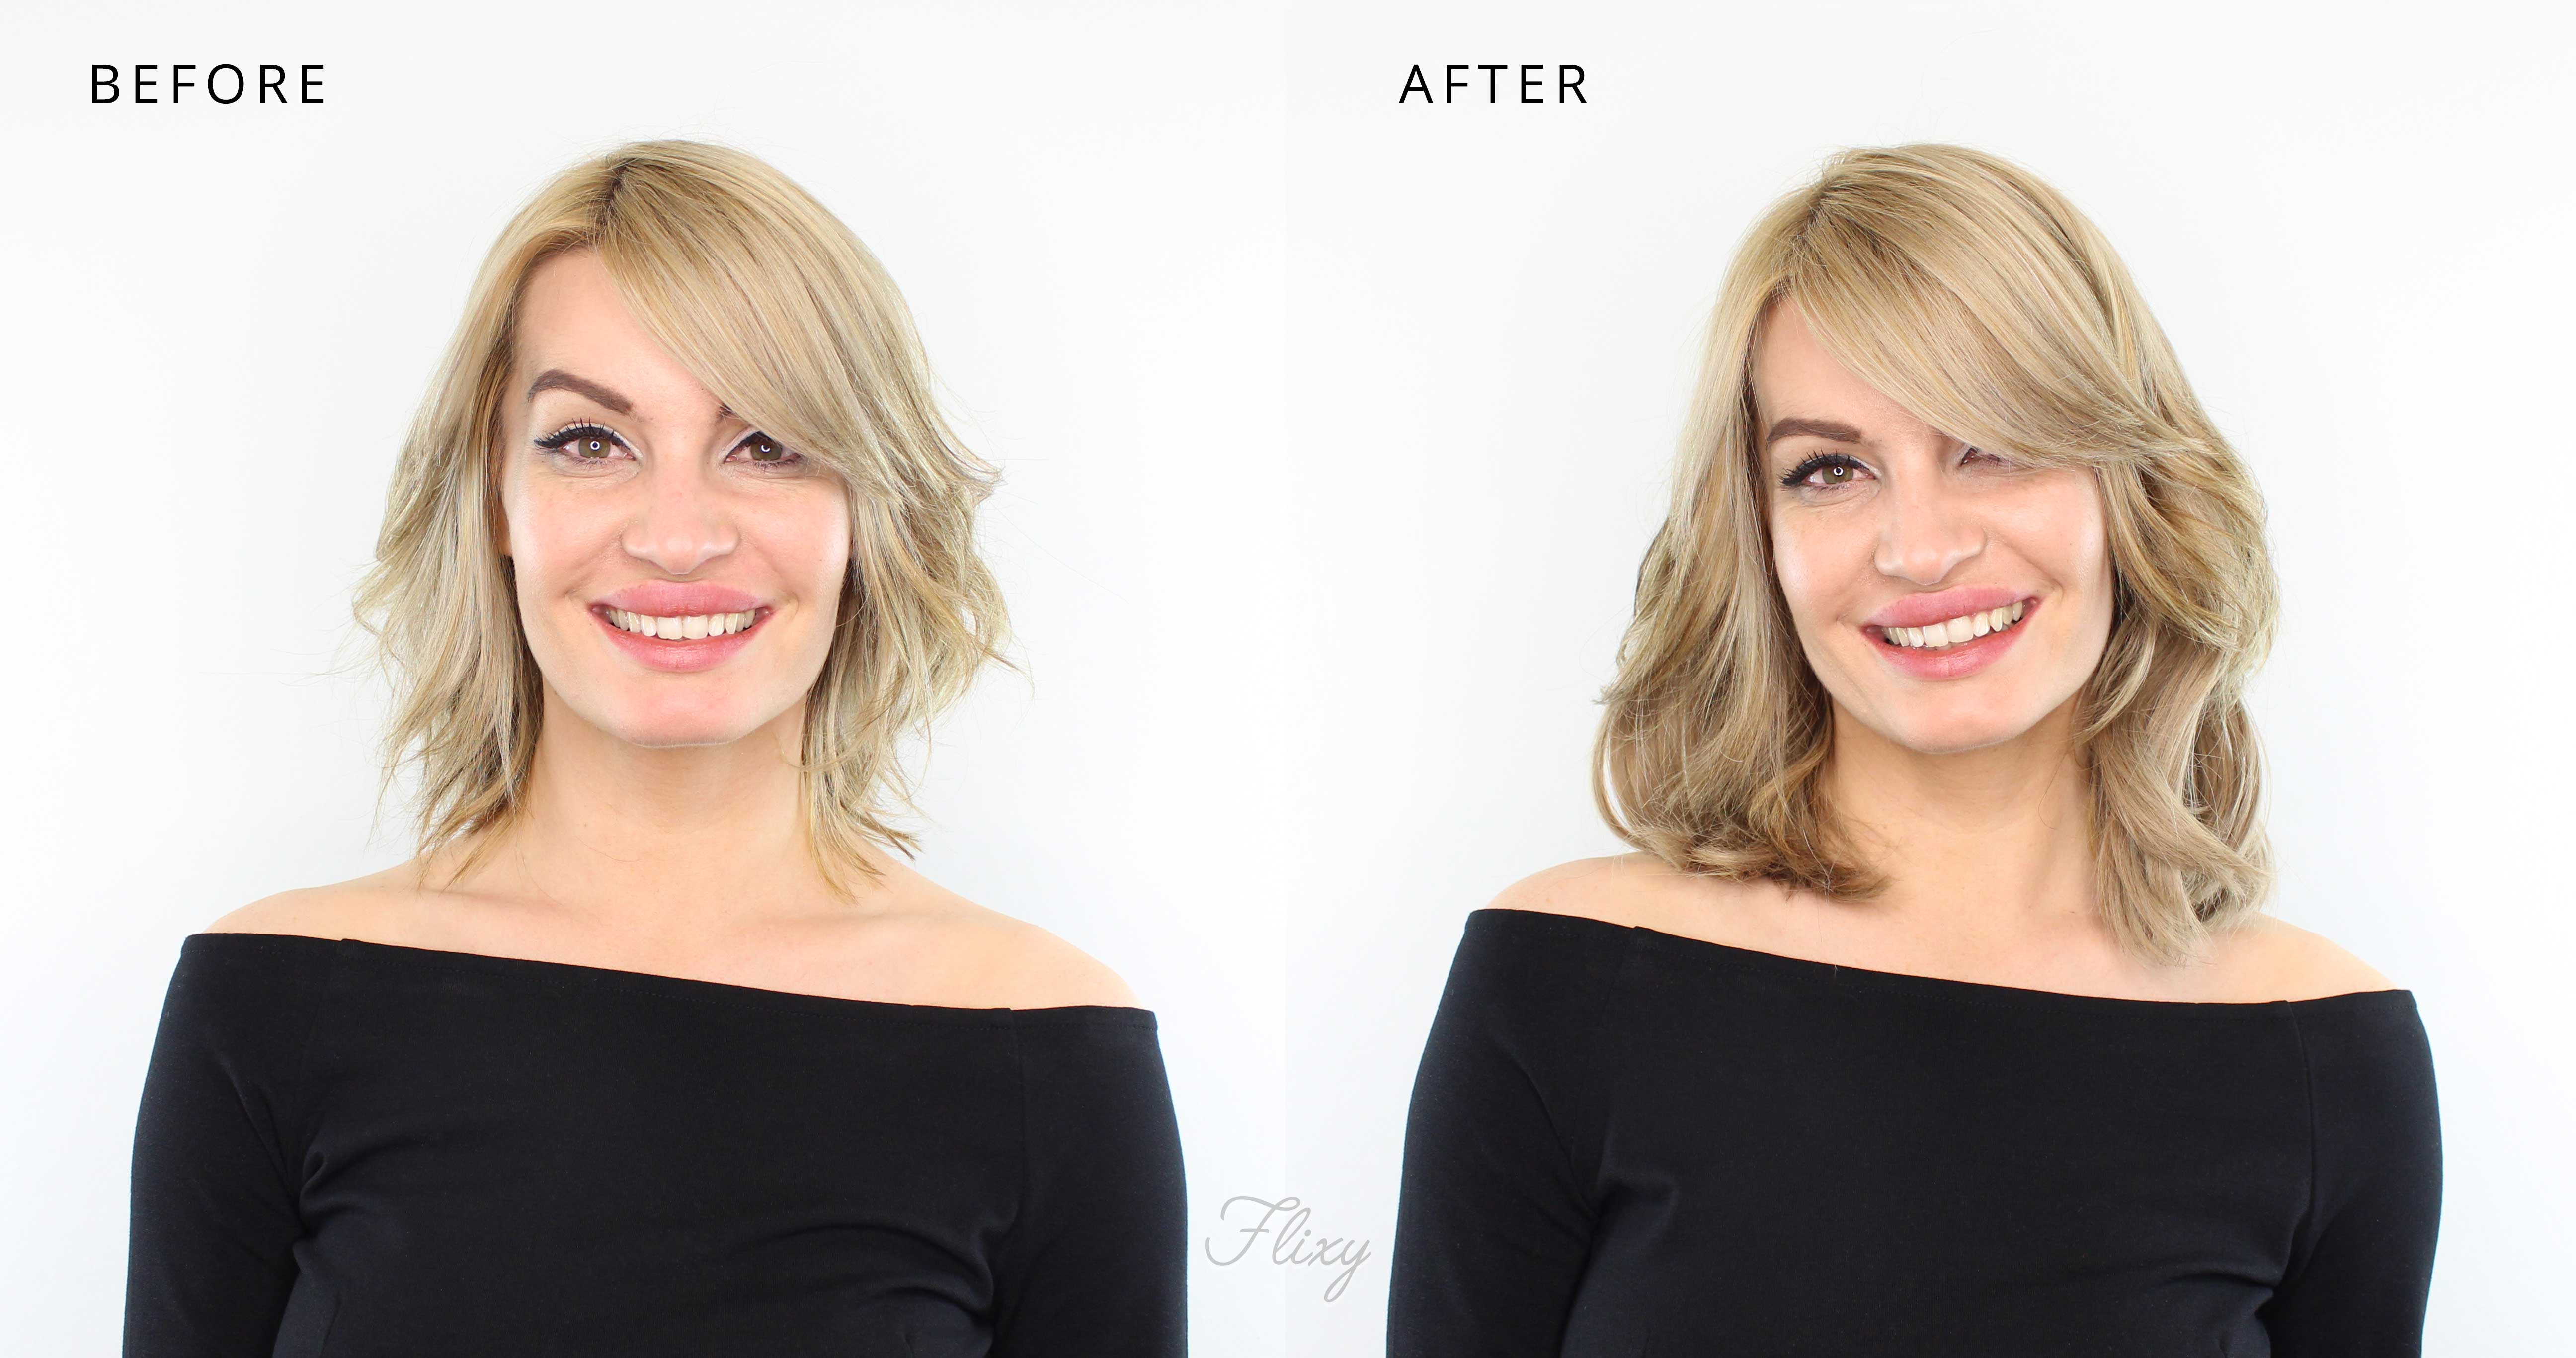 Flixy halo hair extensions in Dirty Blonde - Before & After